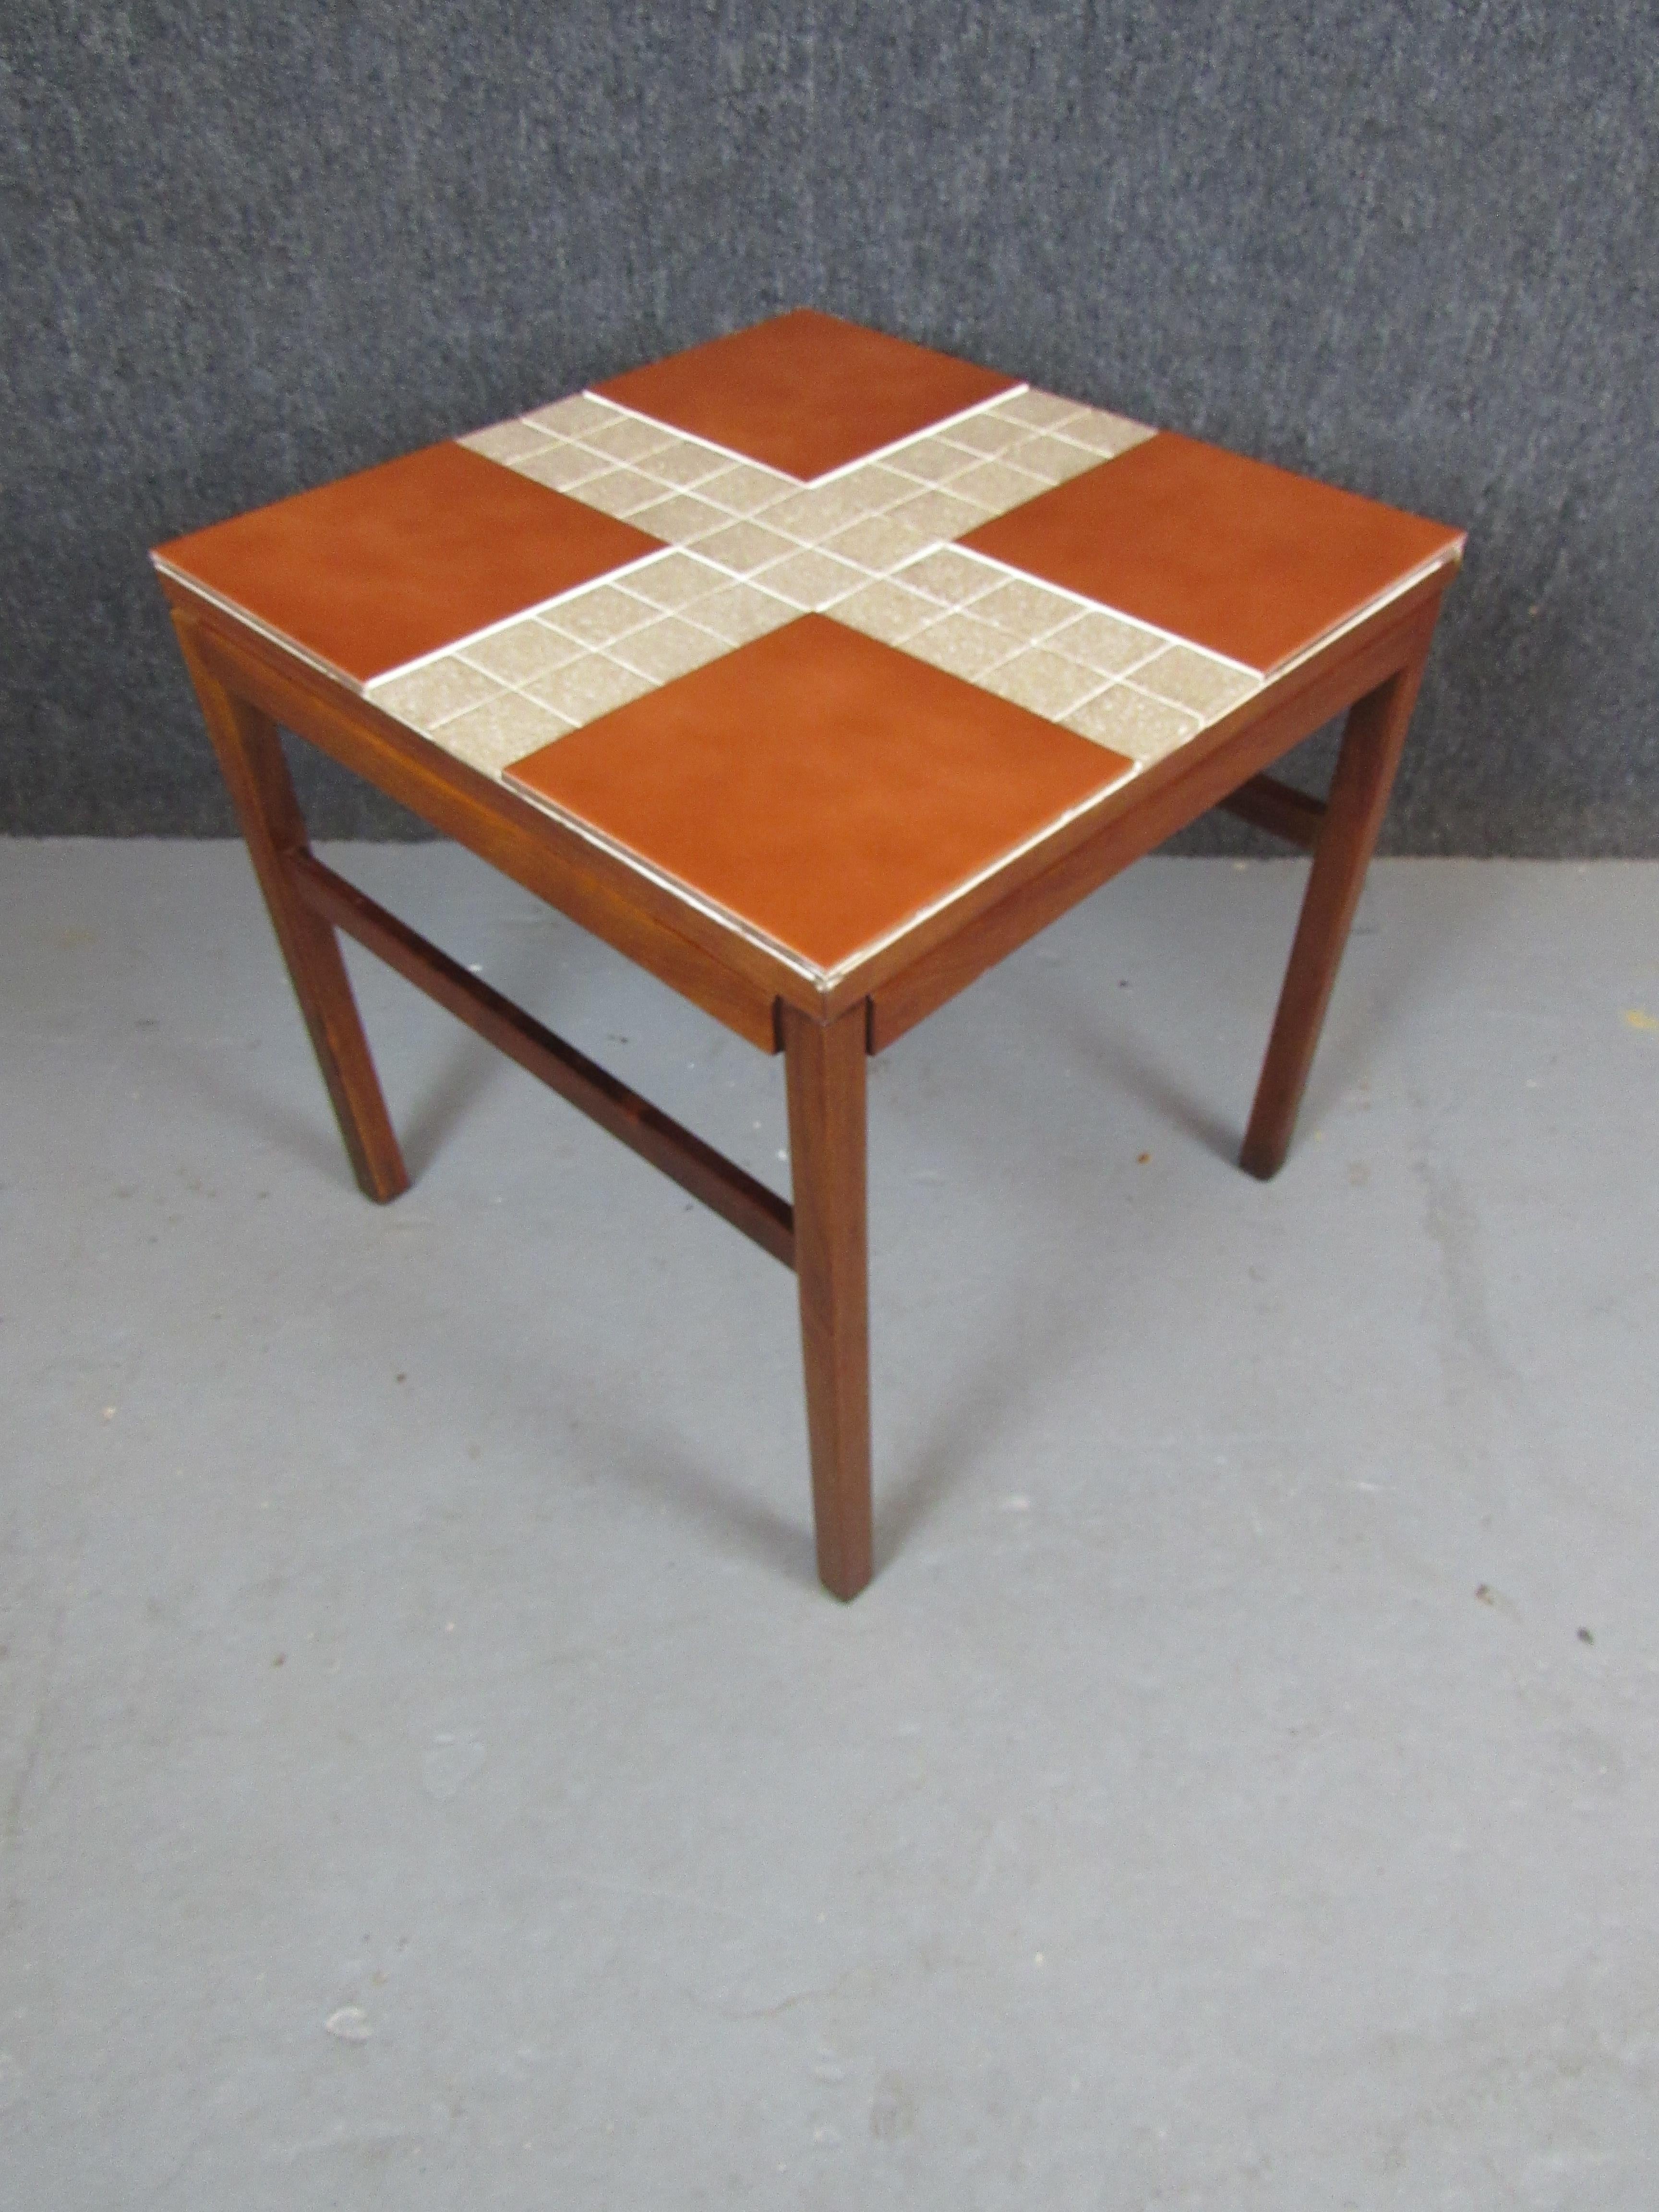 Vintage Terracota Tile & Teak Table by Arbatove In Good Condition For Sale In Brooklyn, NY